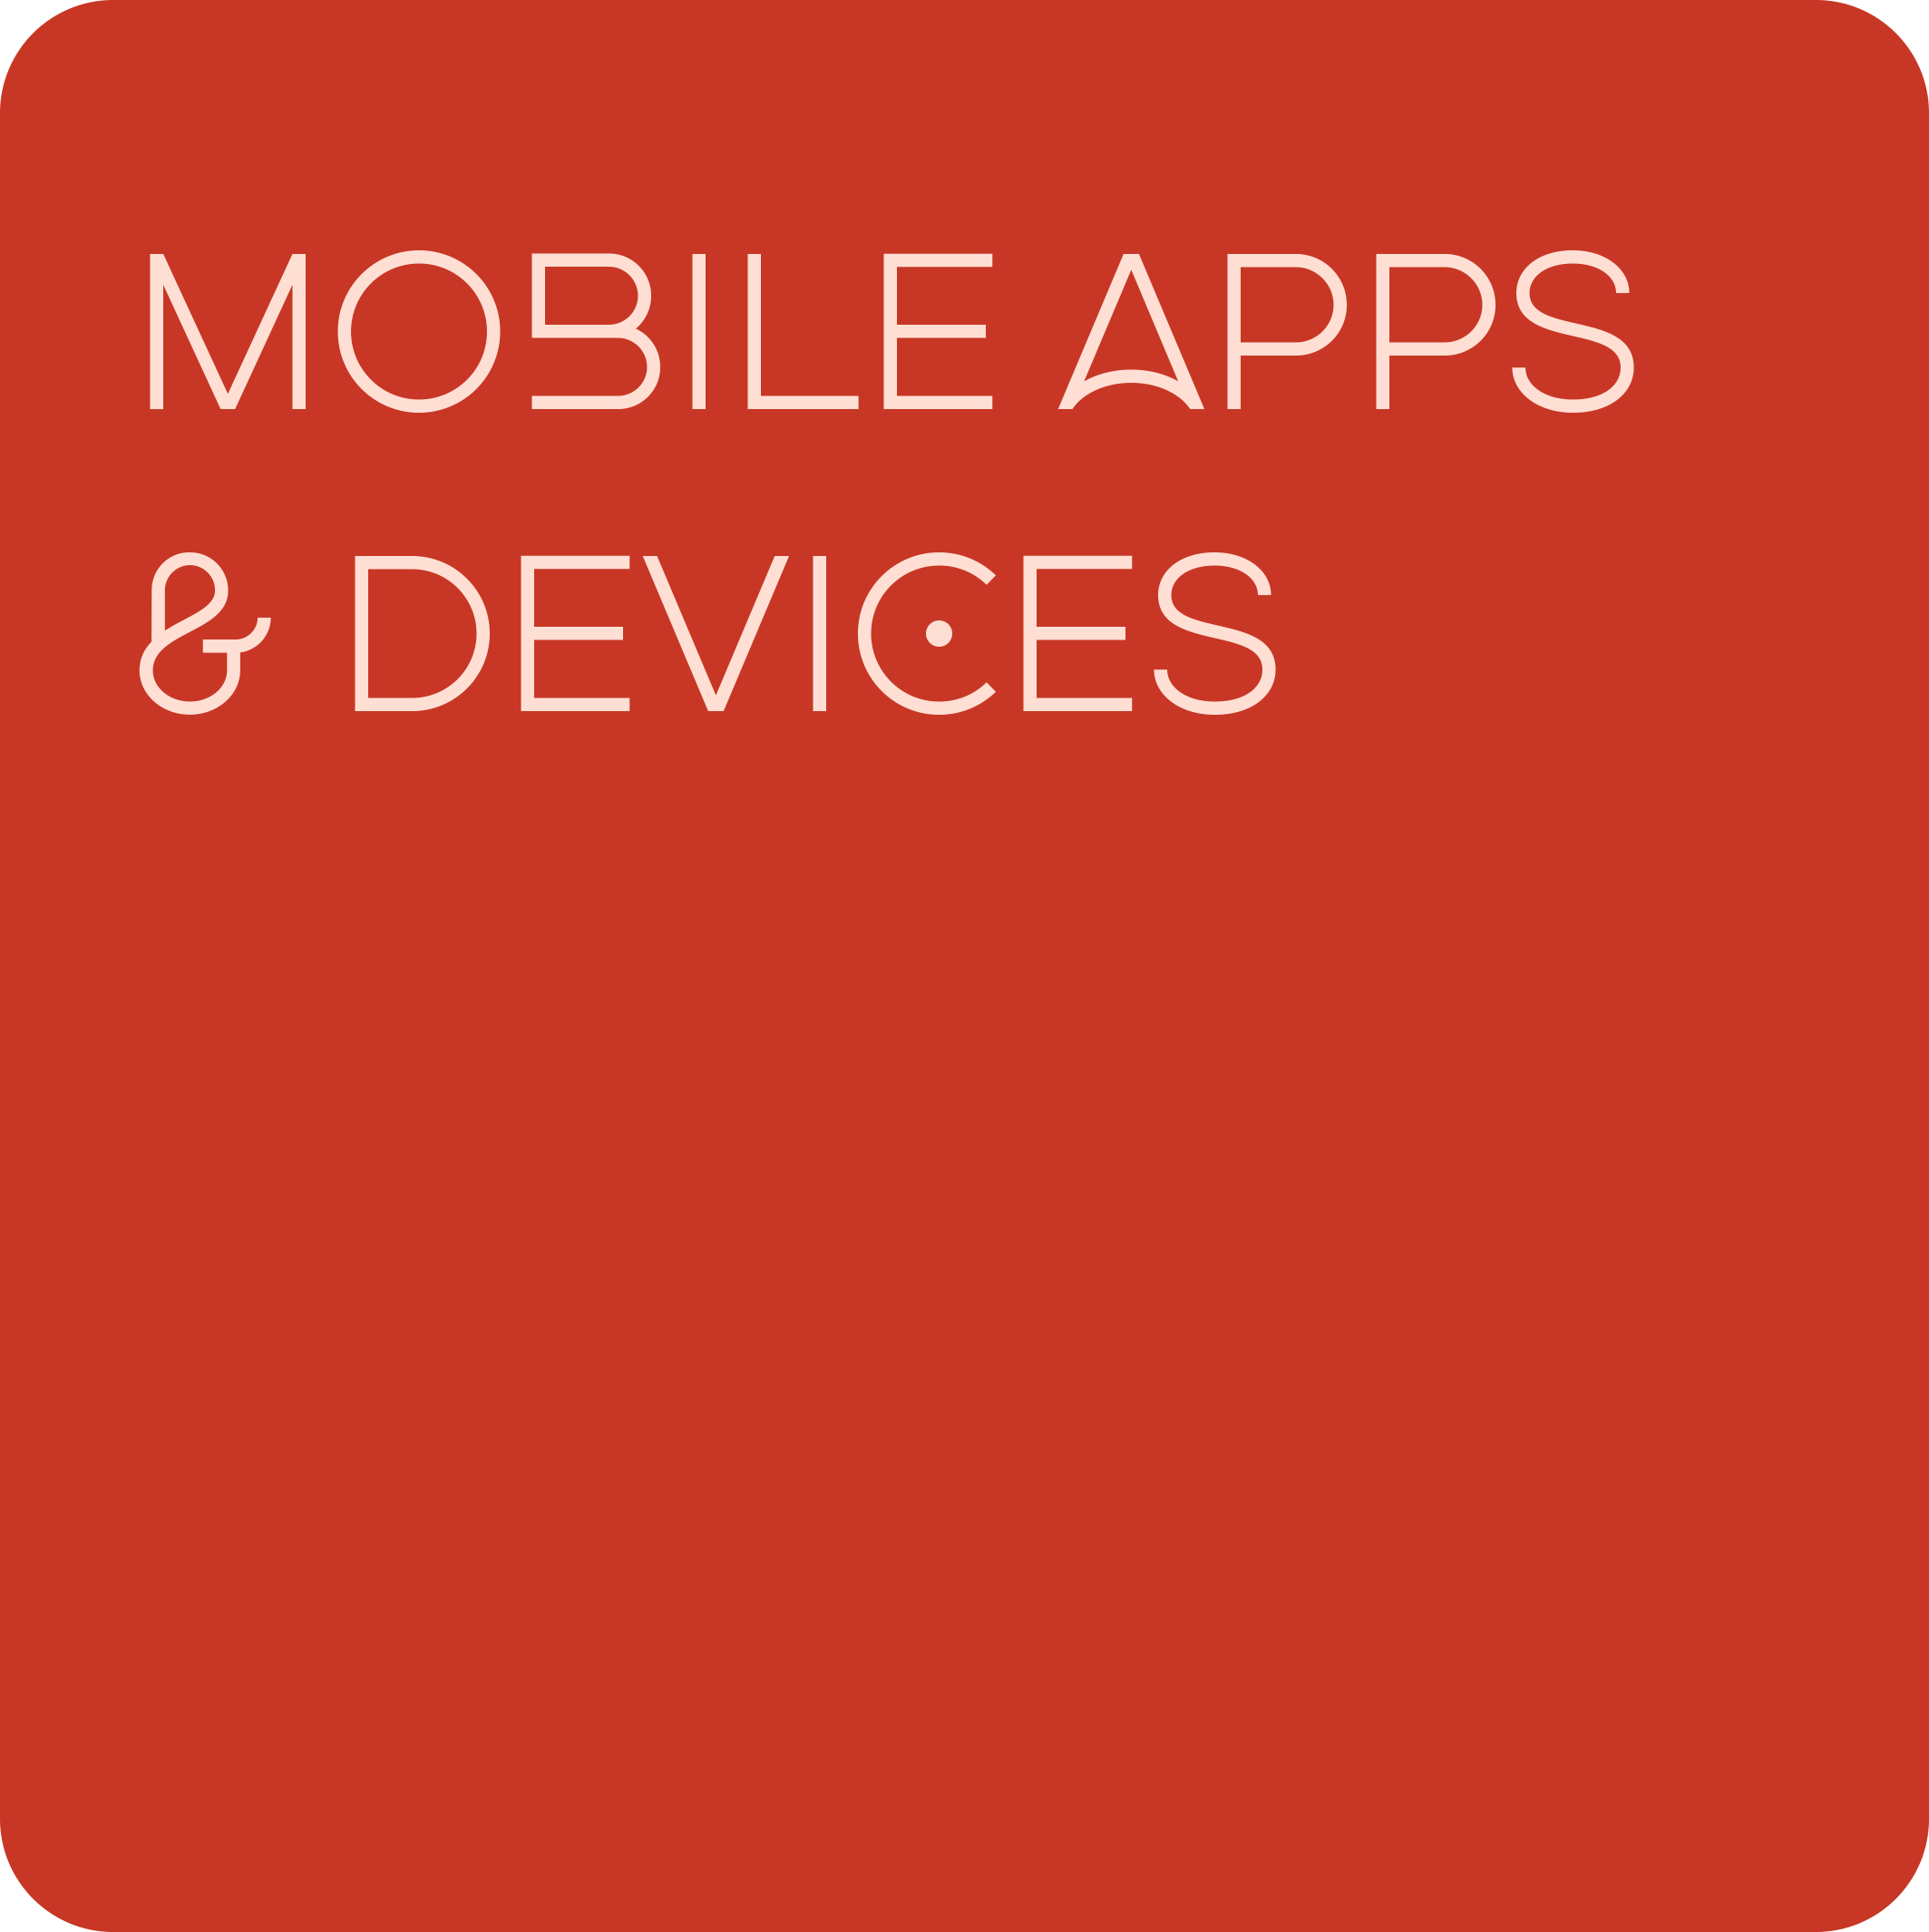 Mobile-Apps-and-Devices_1